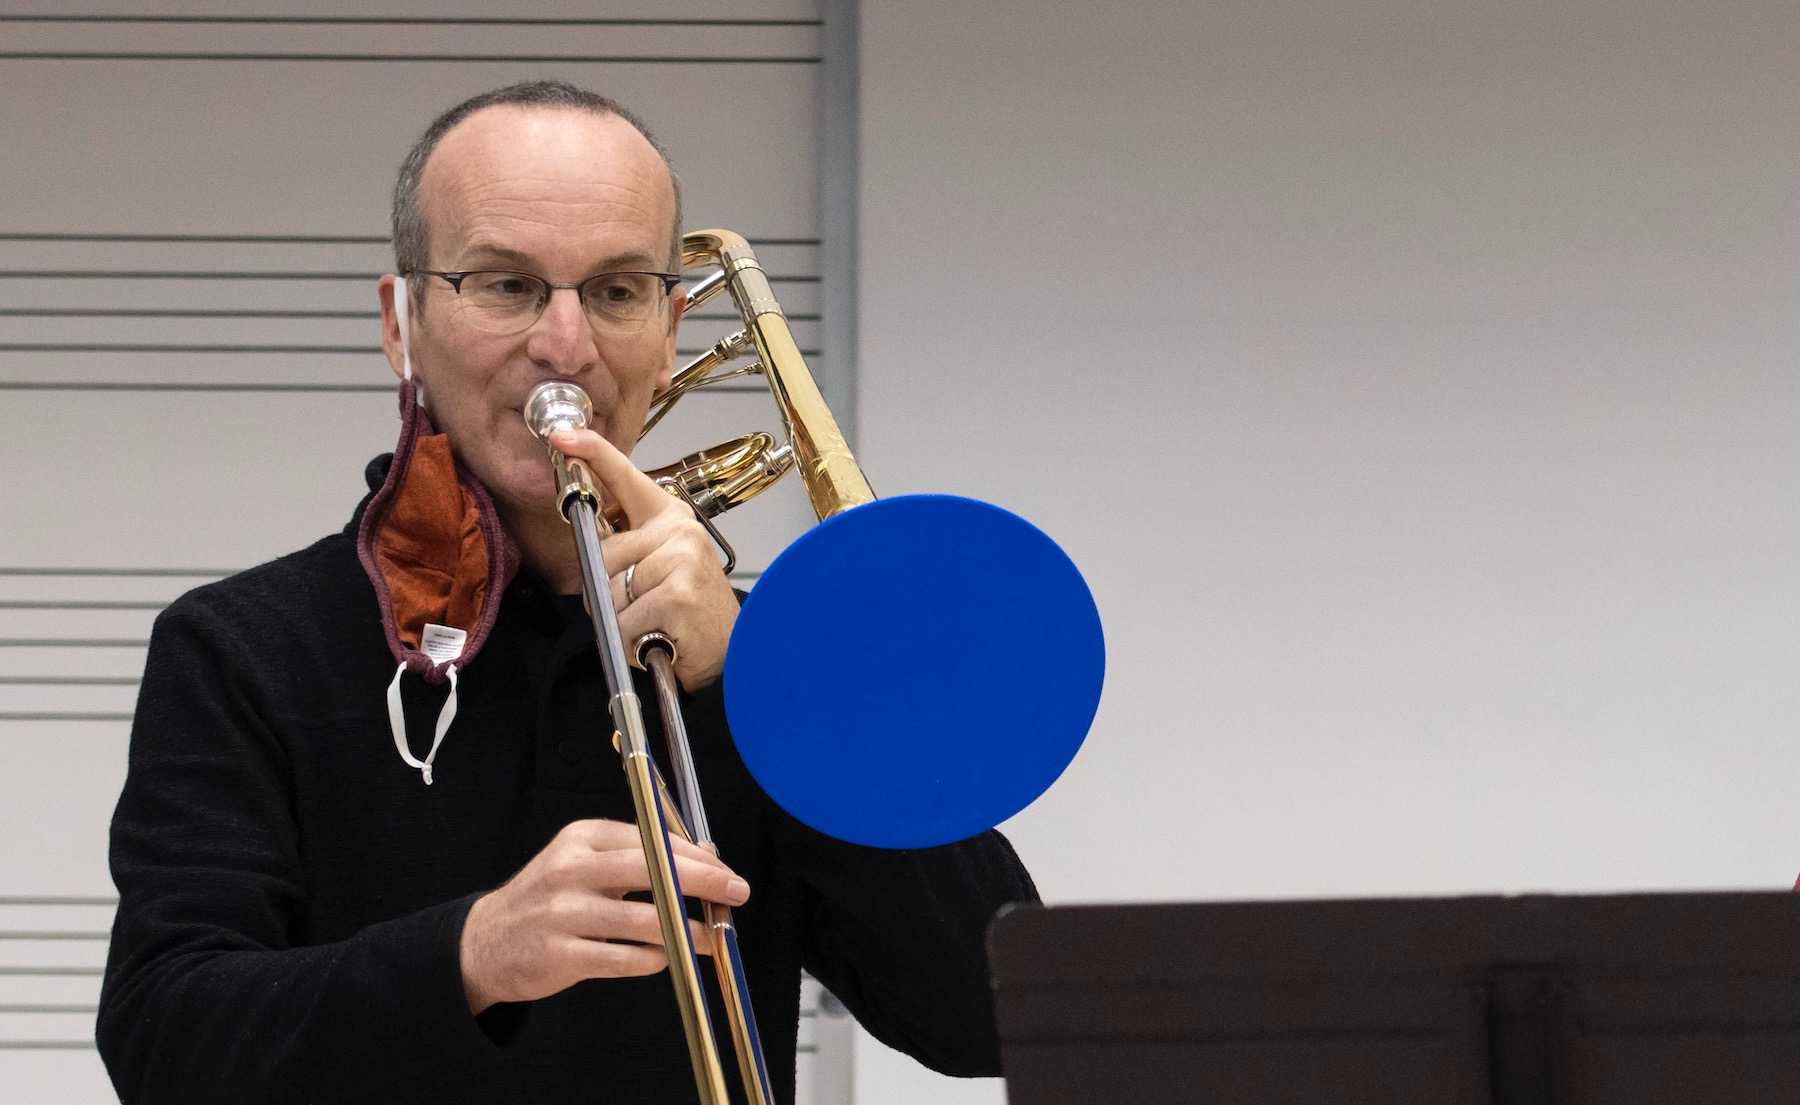 Tim Albright plays the trombone during a teaching session.